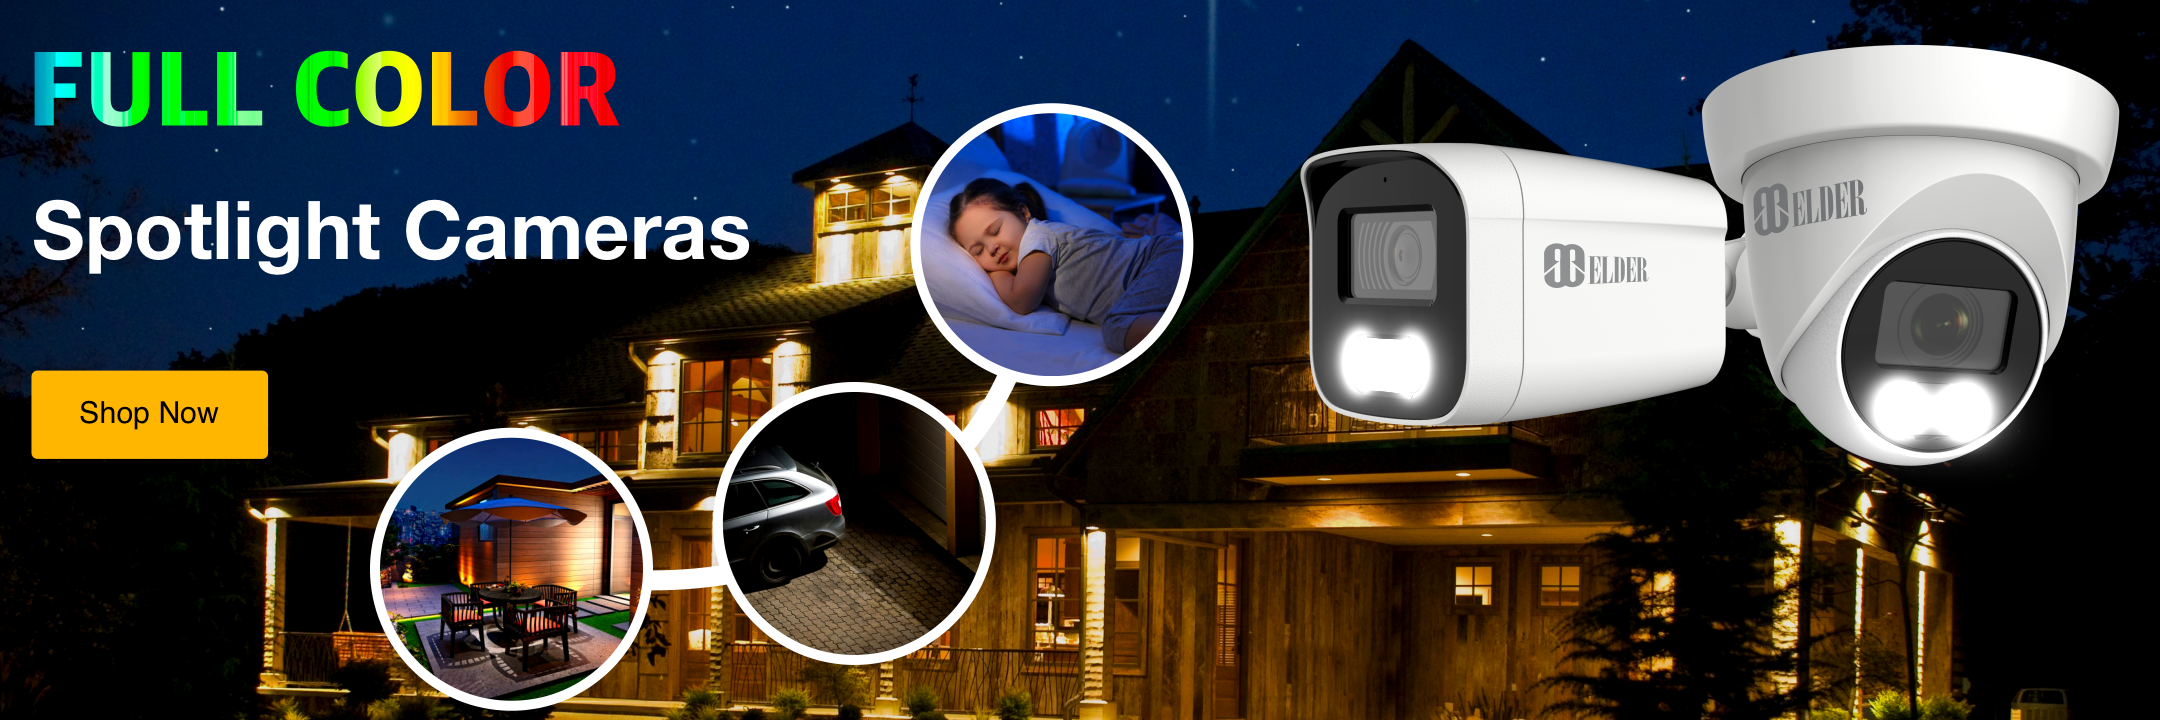 Full color spotlight security camera systems night vision. Nocturnal surveillance camera systems.